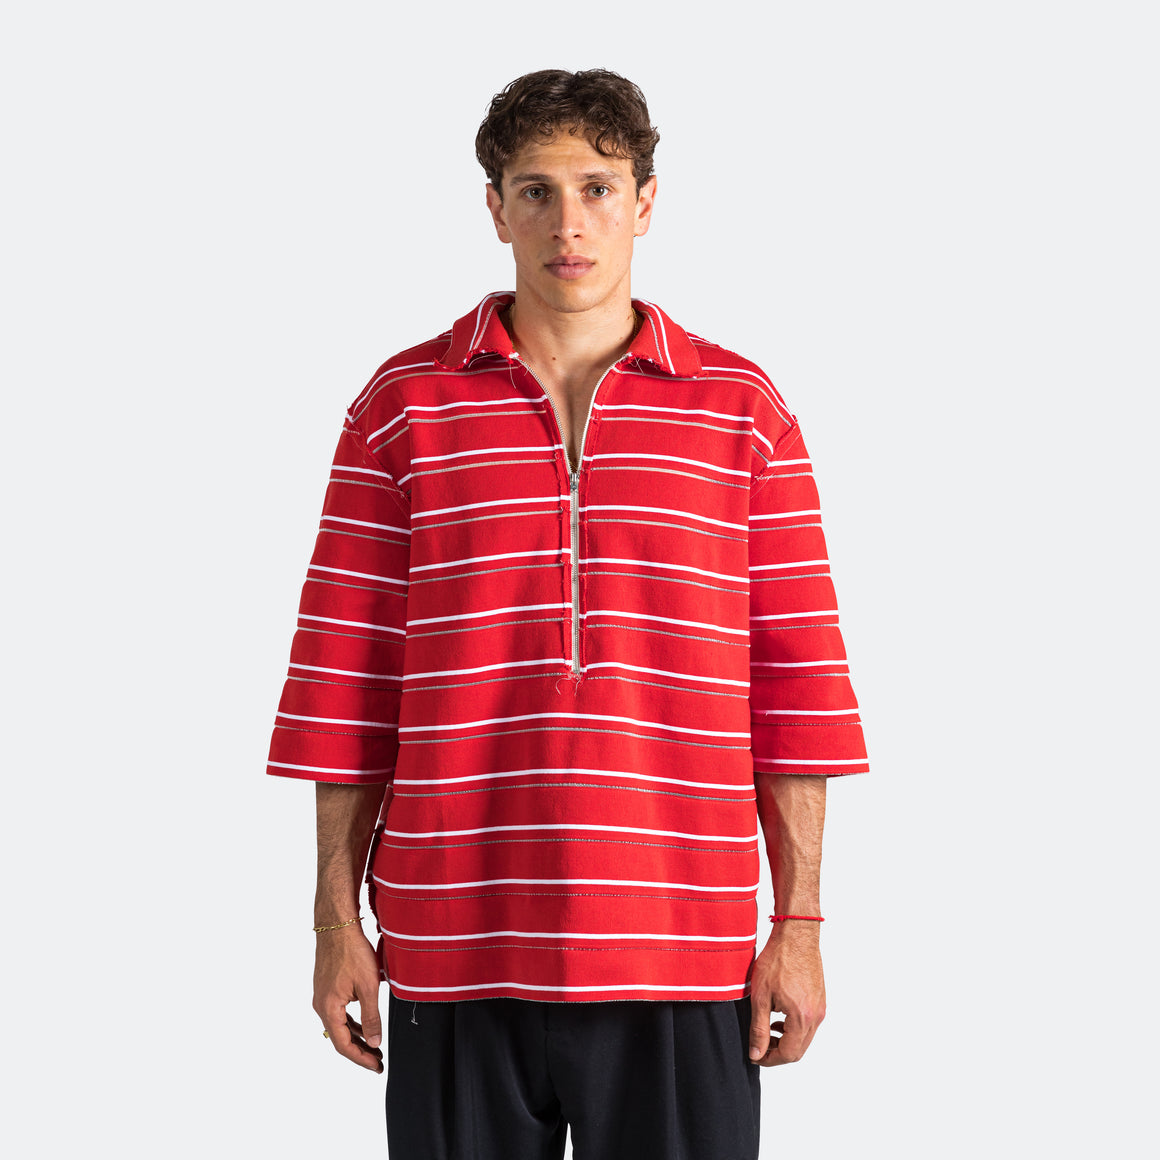 Camiel Fortgens - Big Relief Polo - Red/White Stripe - UP THERE